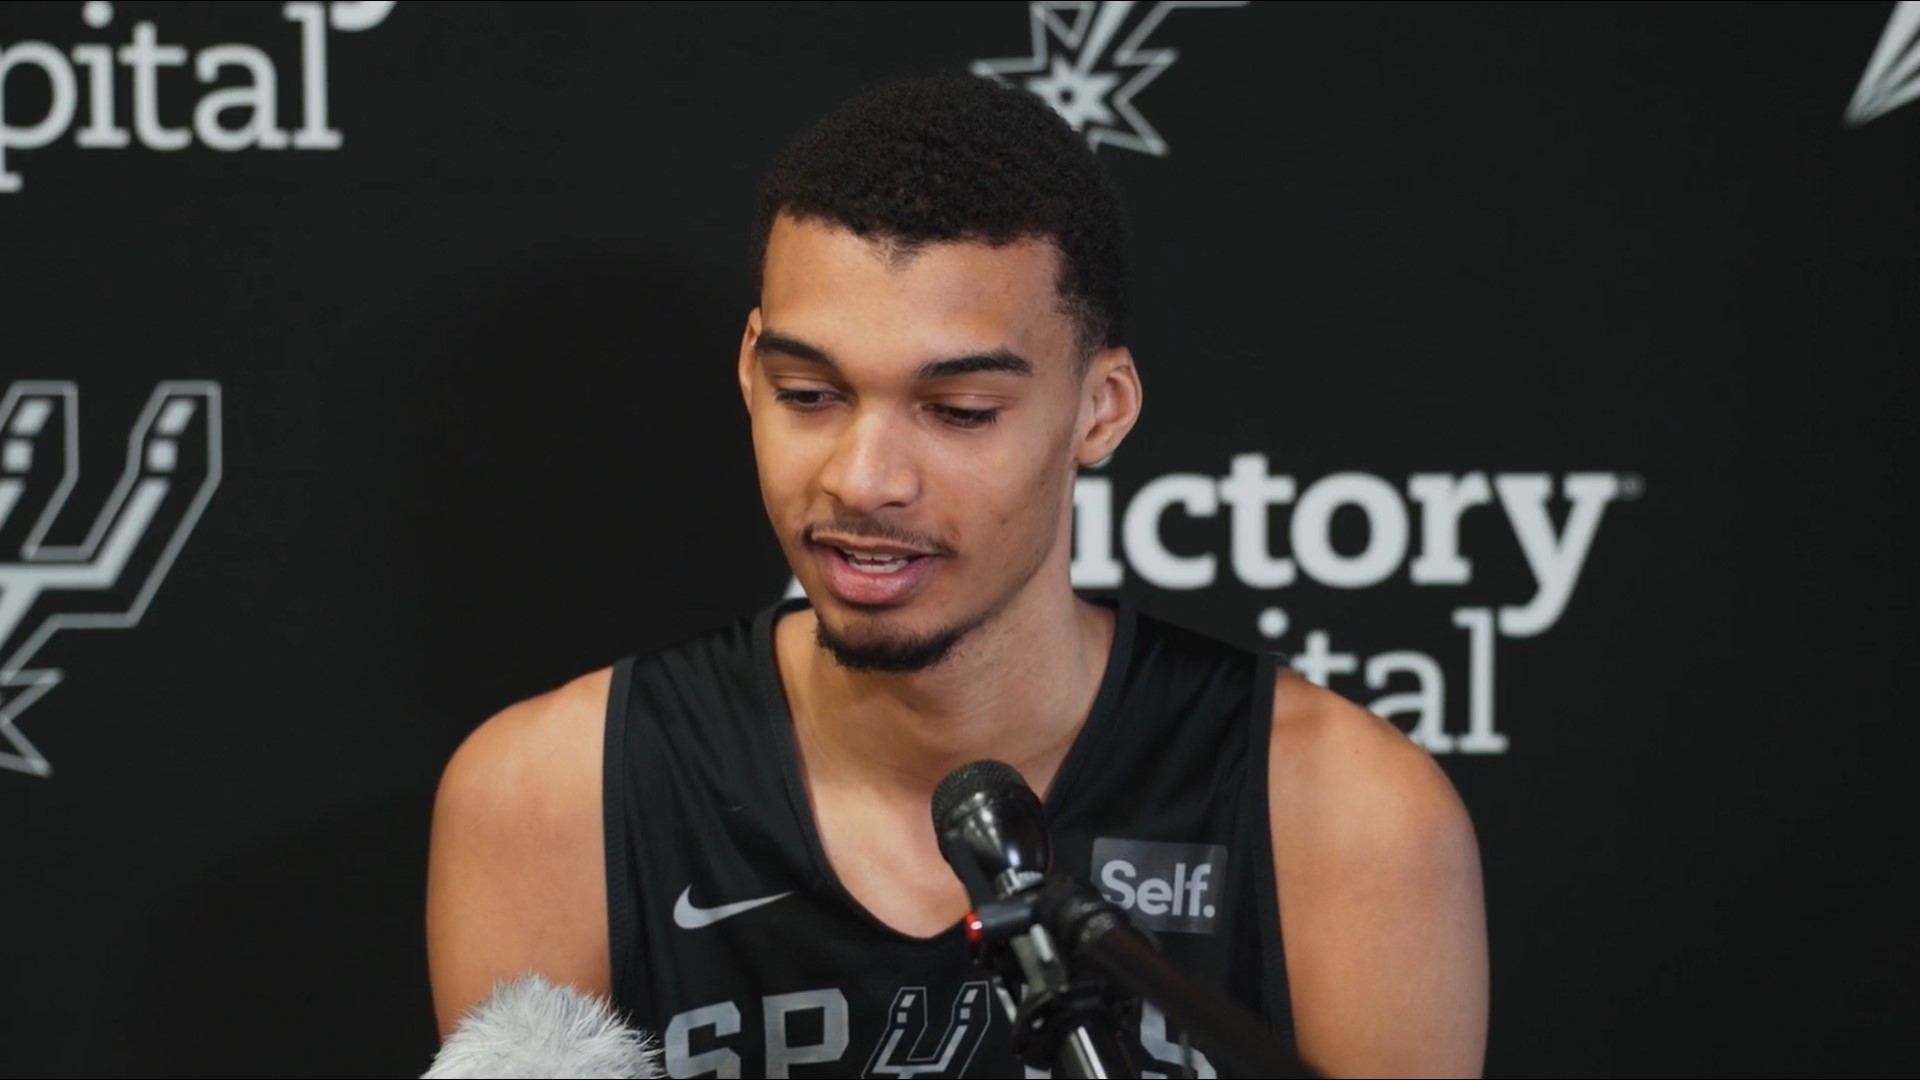 The star rookie answered questions on San Antonio's struggles, the growth he's doing and seeing, Jeremy Sochan, the advice he's received, and much more.